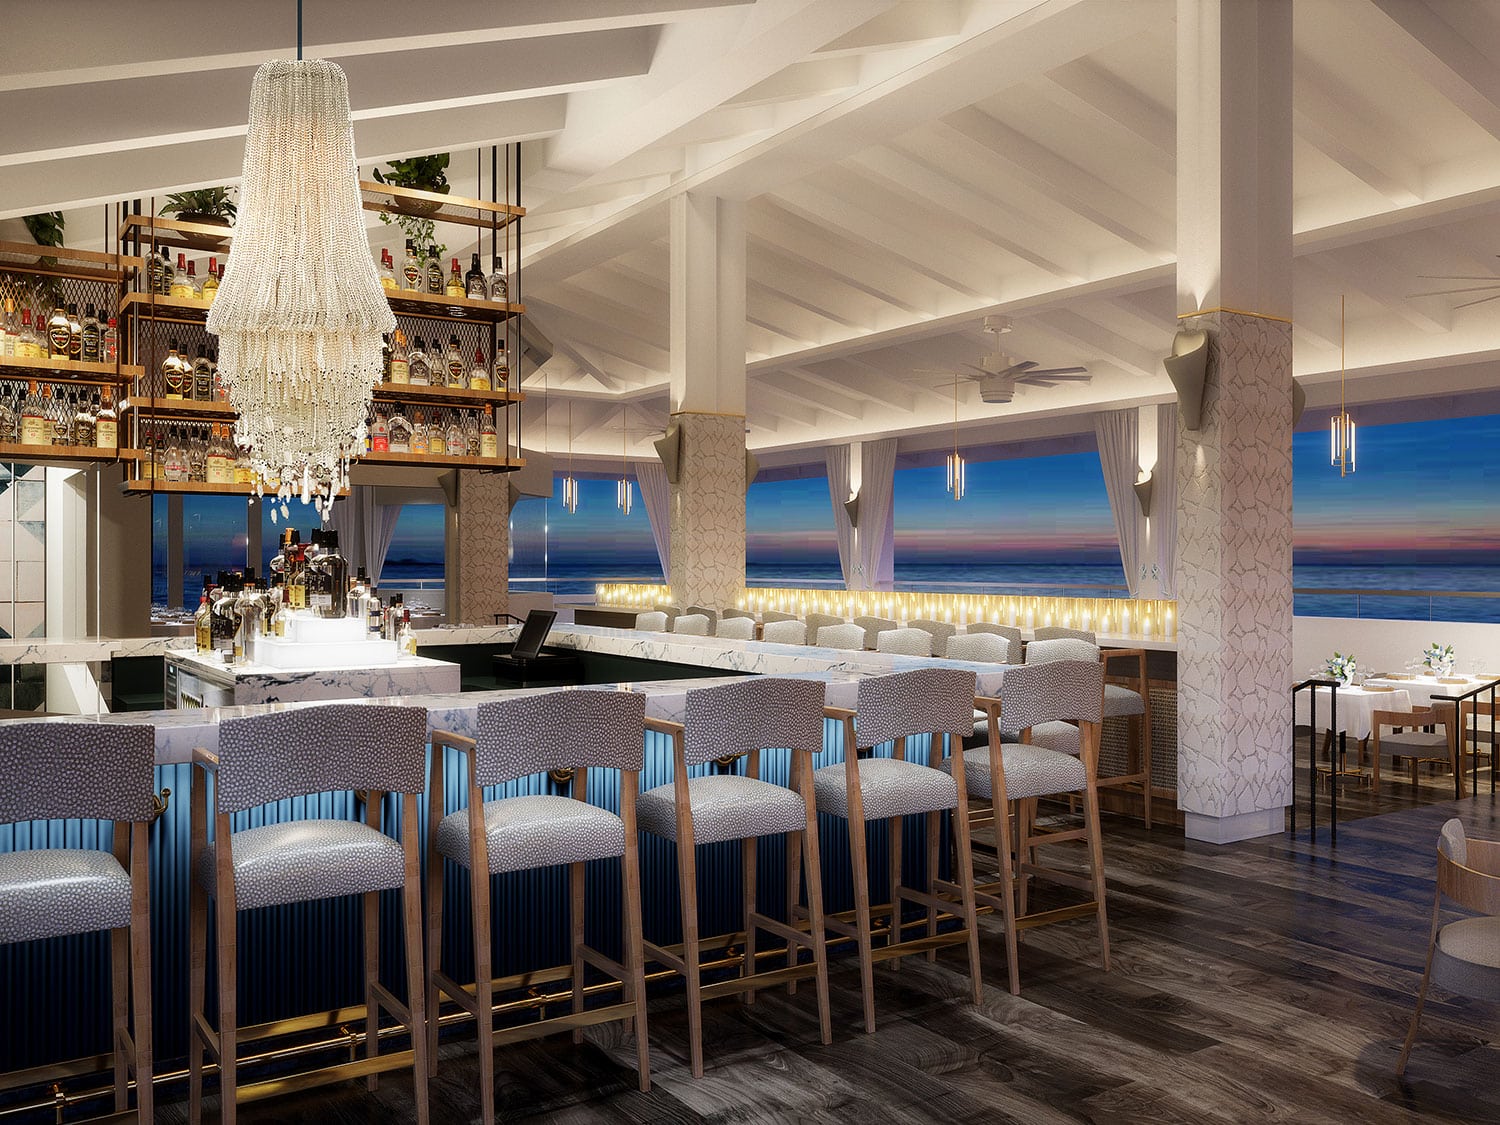 A rendering of the Isla Blue restaurant at Frenchman's Reef in St. Thomas, U.S. Virgin Islands.